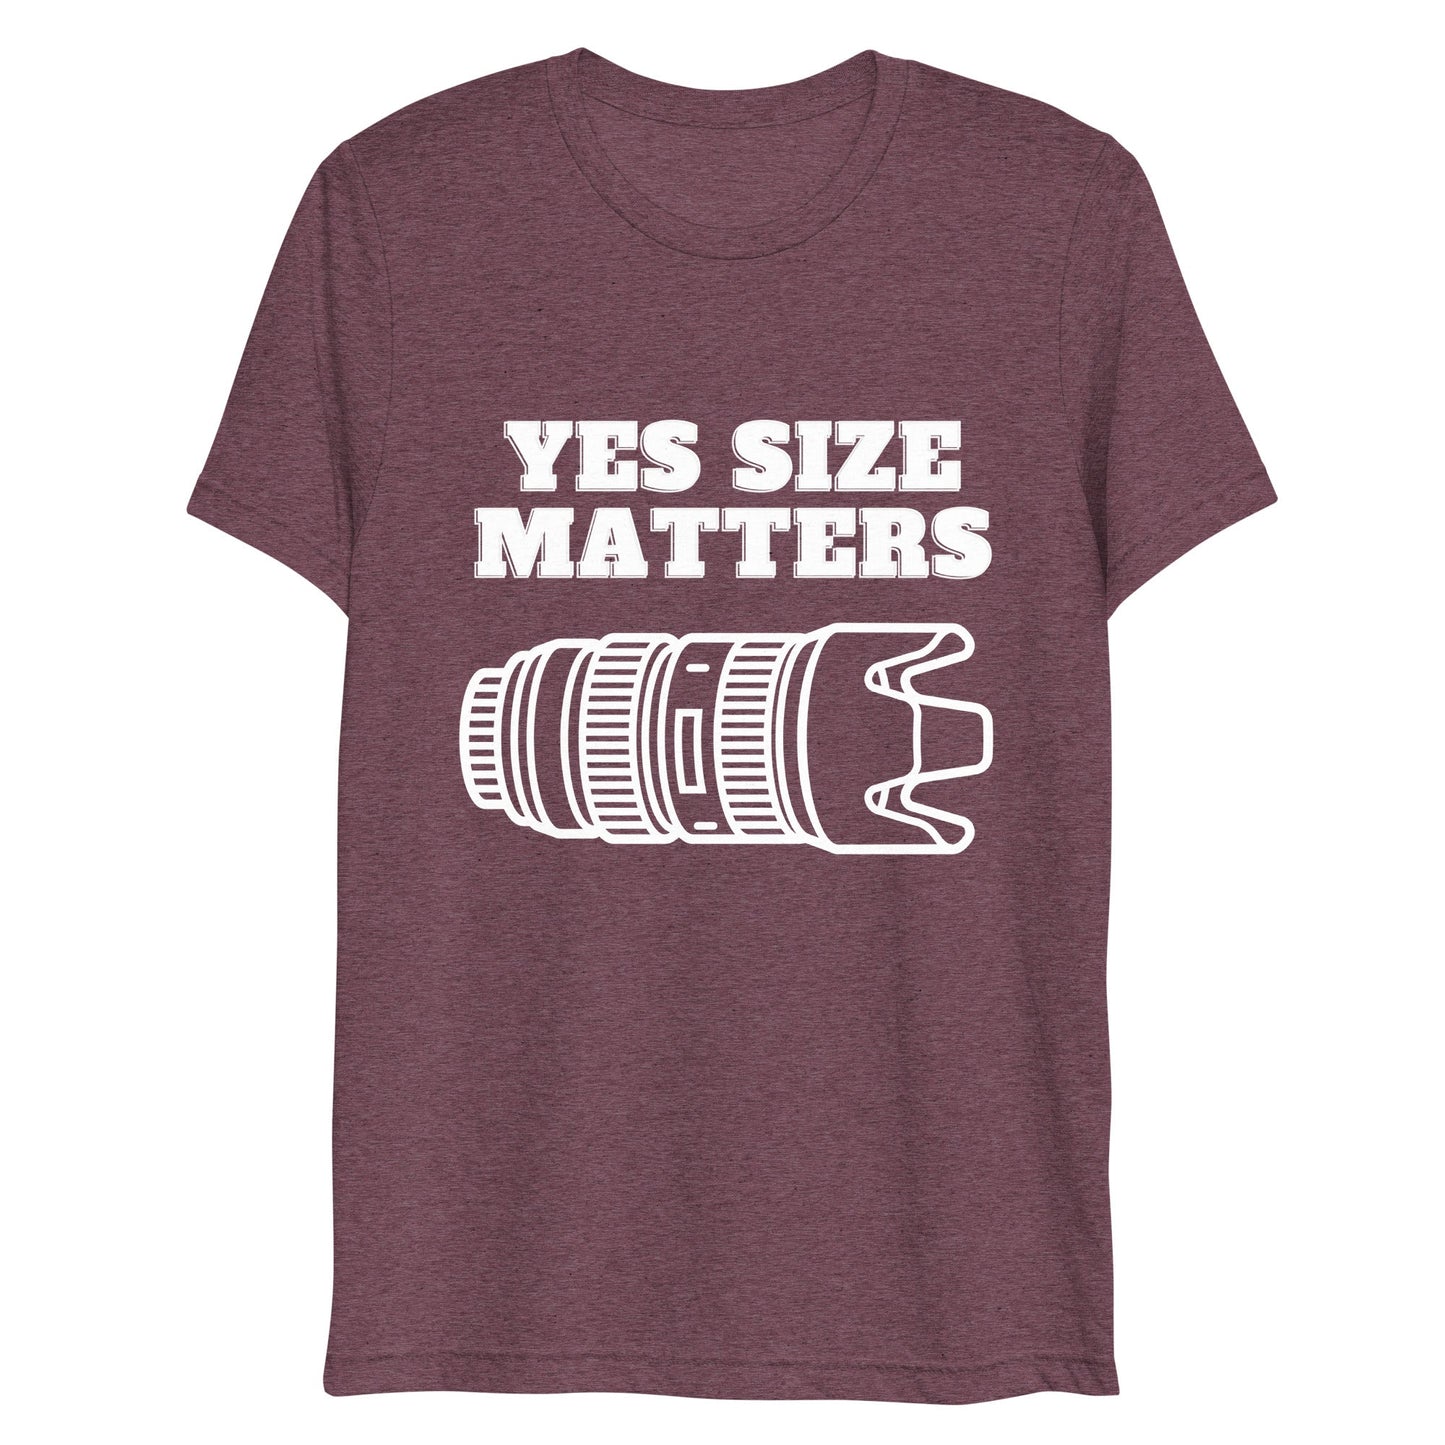 Size Matters Photography Shirt - Photographer Shirt - Gifts for Photographers - Women's Tees - Funny Shirt - ShopJeanPhotography.com